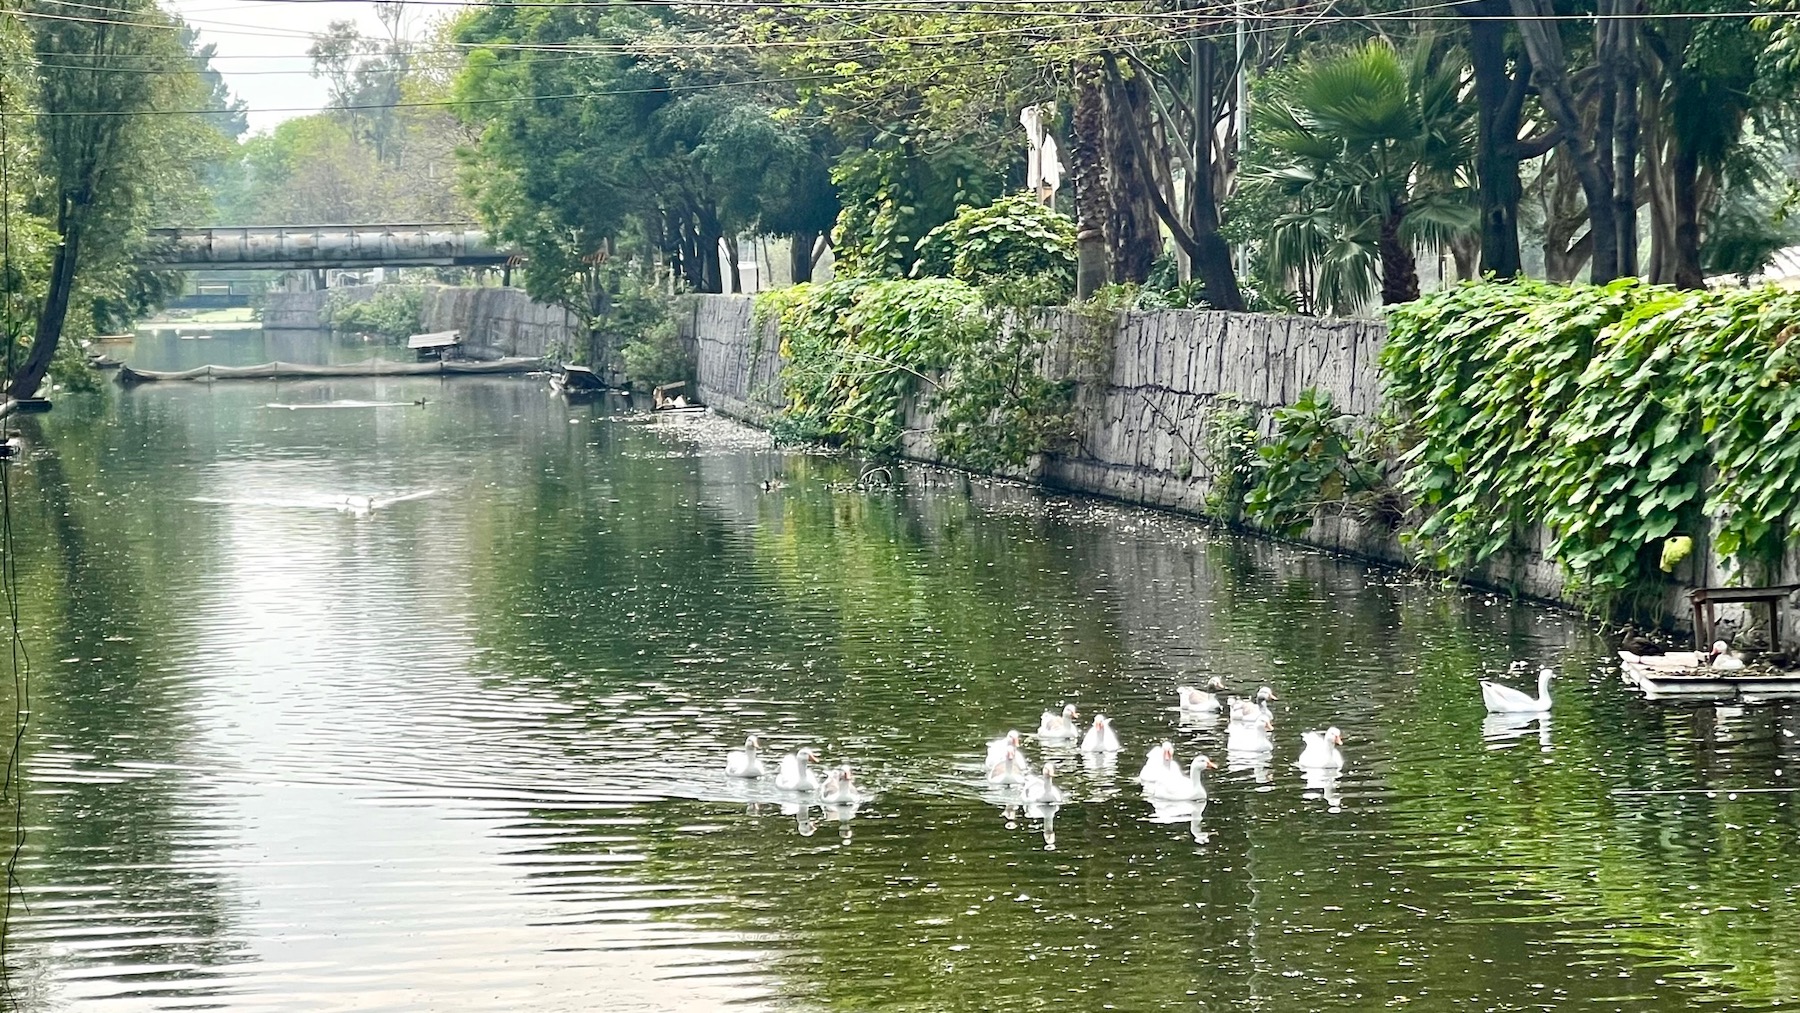 View of Canal Nacional, an oasis in central Mexico City.